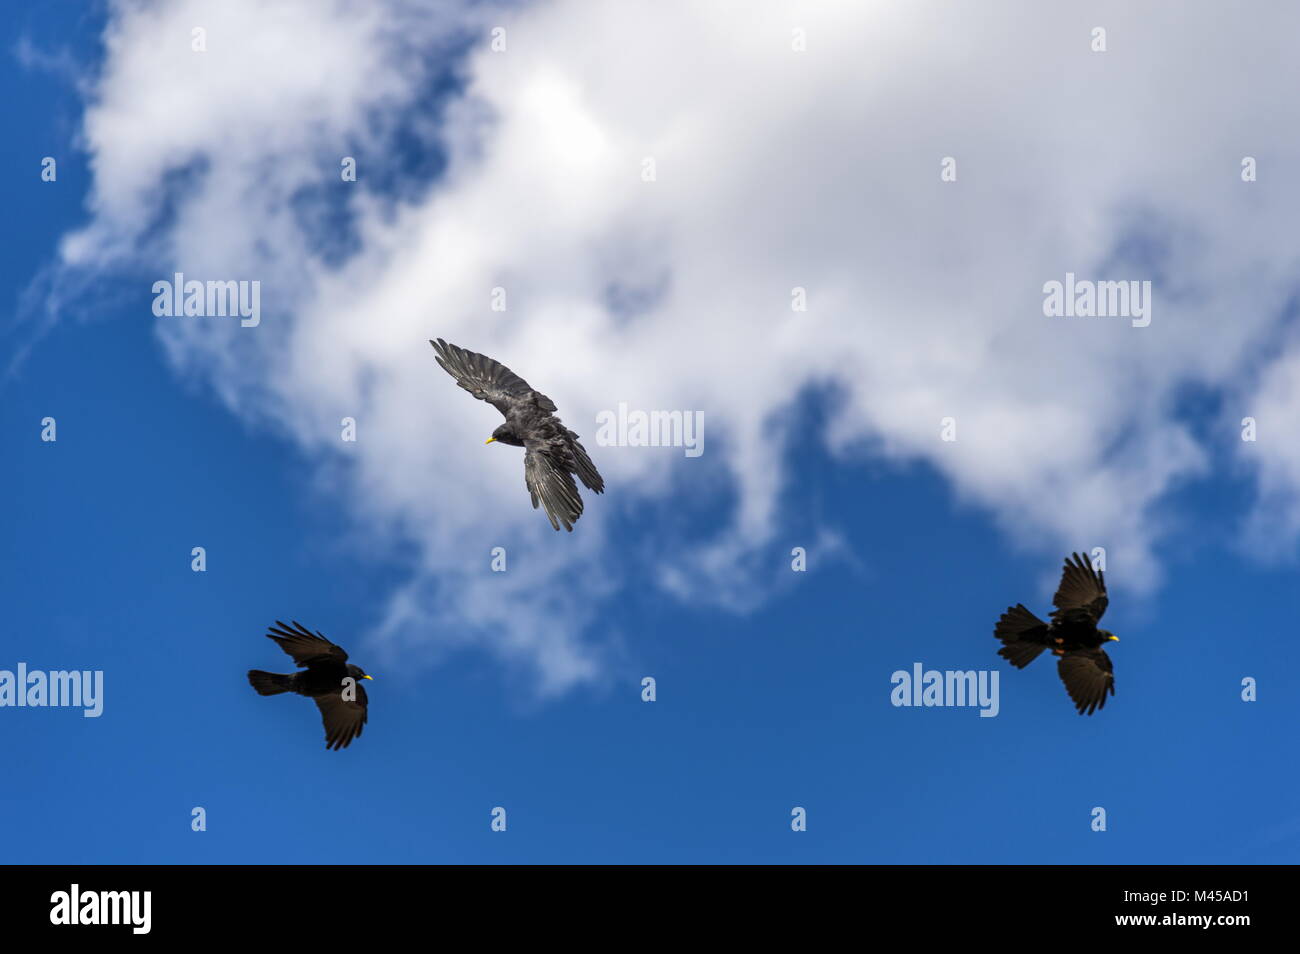 3 Alpendohlen in a dogfight against a blue sky and Stock Photo